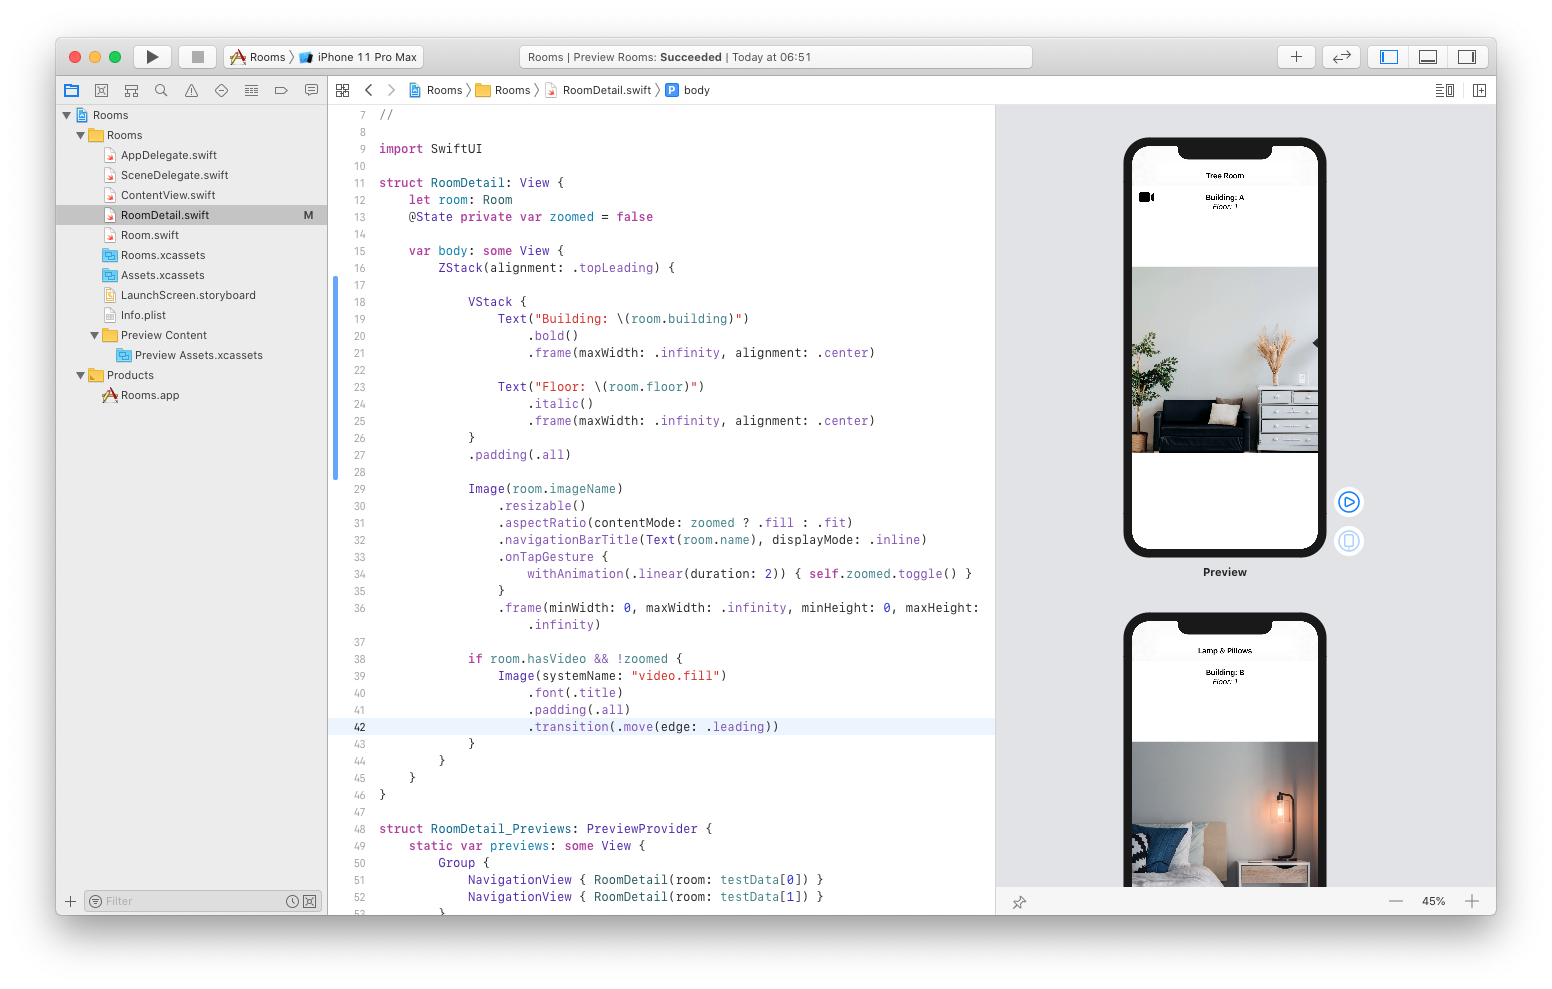 https://res.cloudinary.com/zavrelj/image/upload/v1578455032/codewithjan/swiftui-by-examples/swiftui-by-examples-49.png